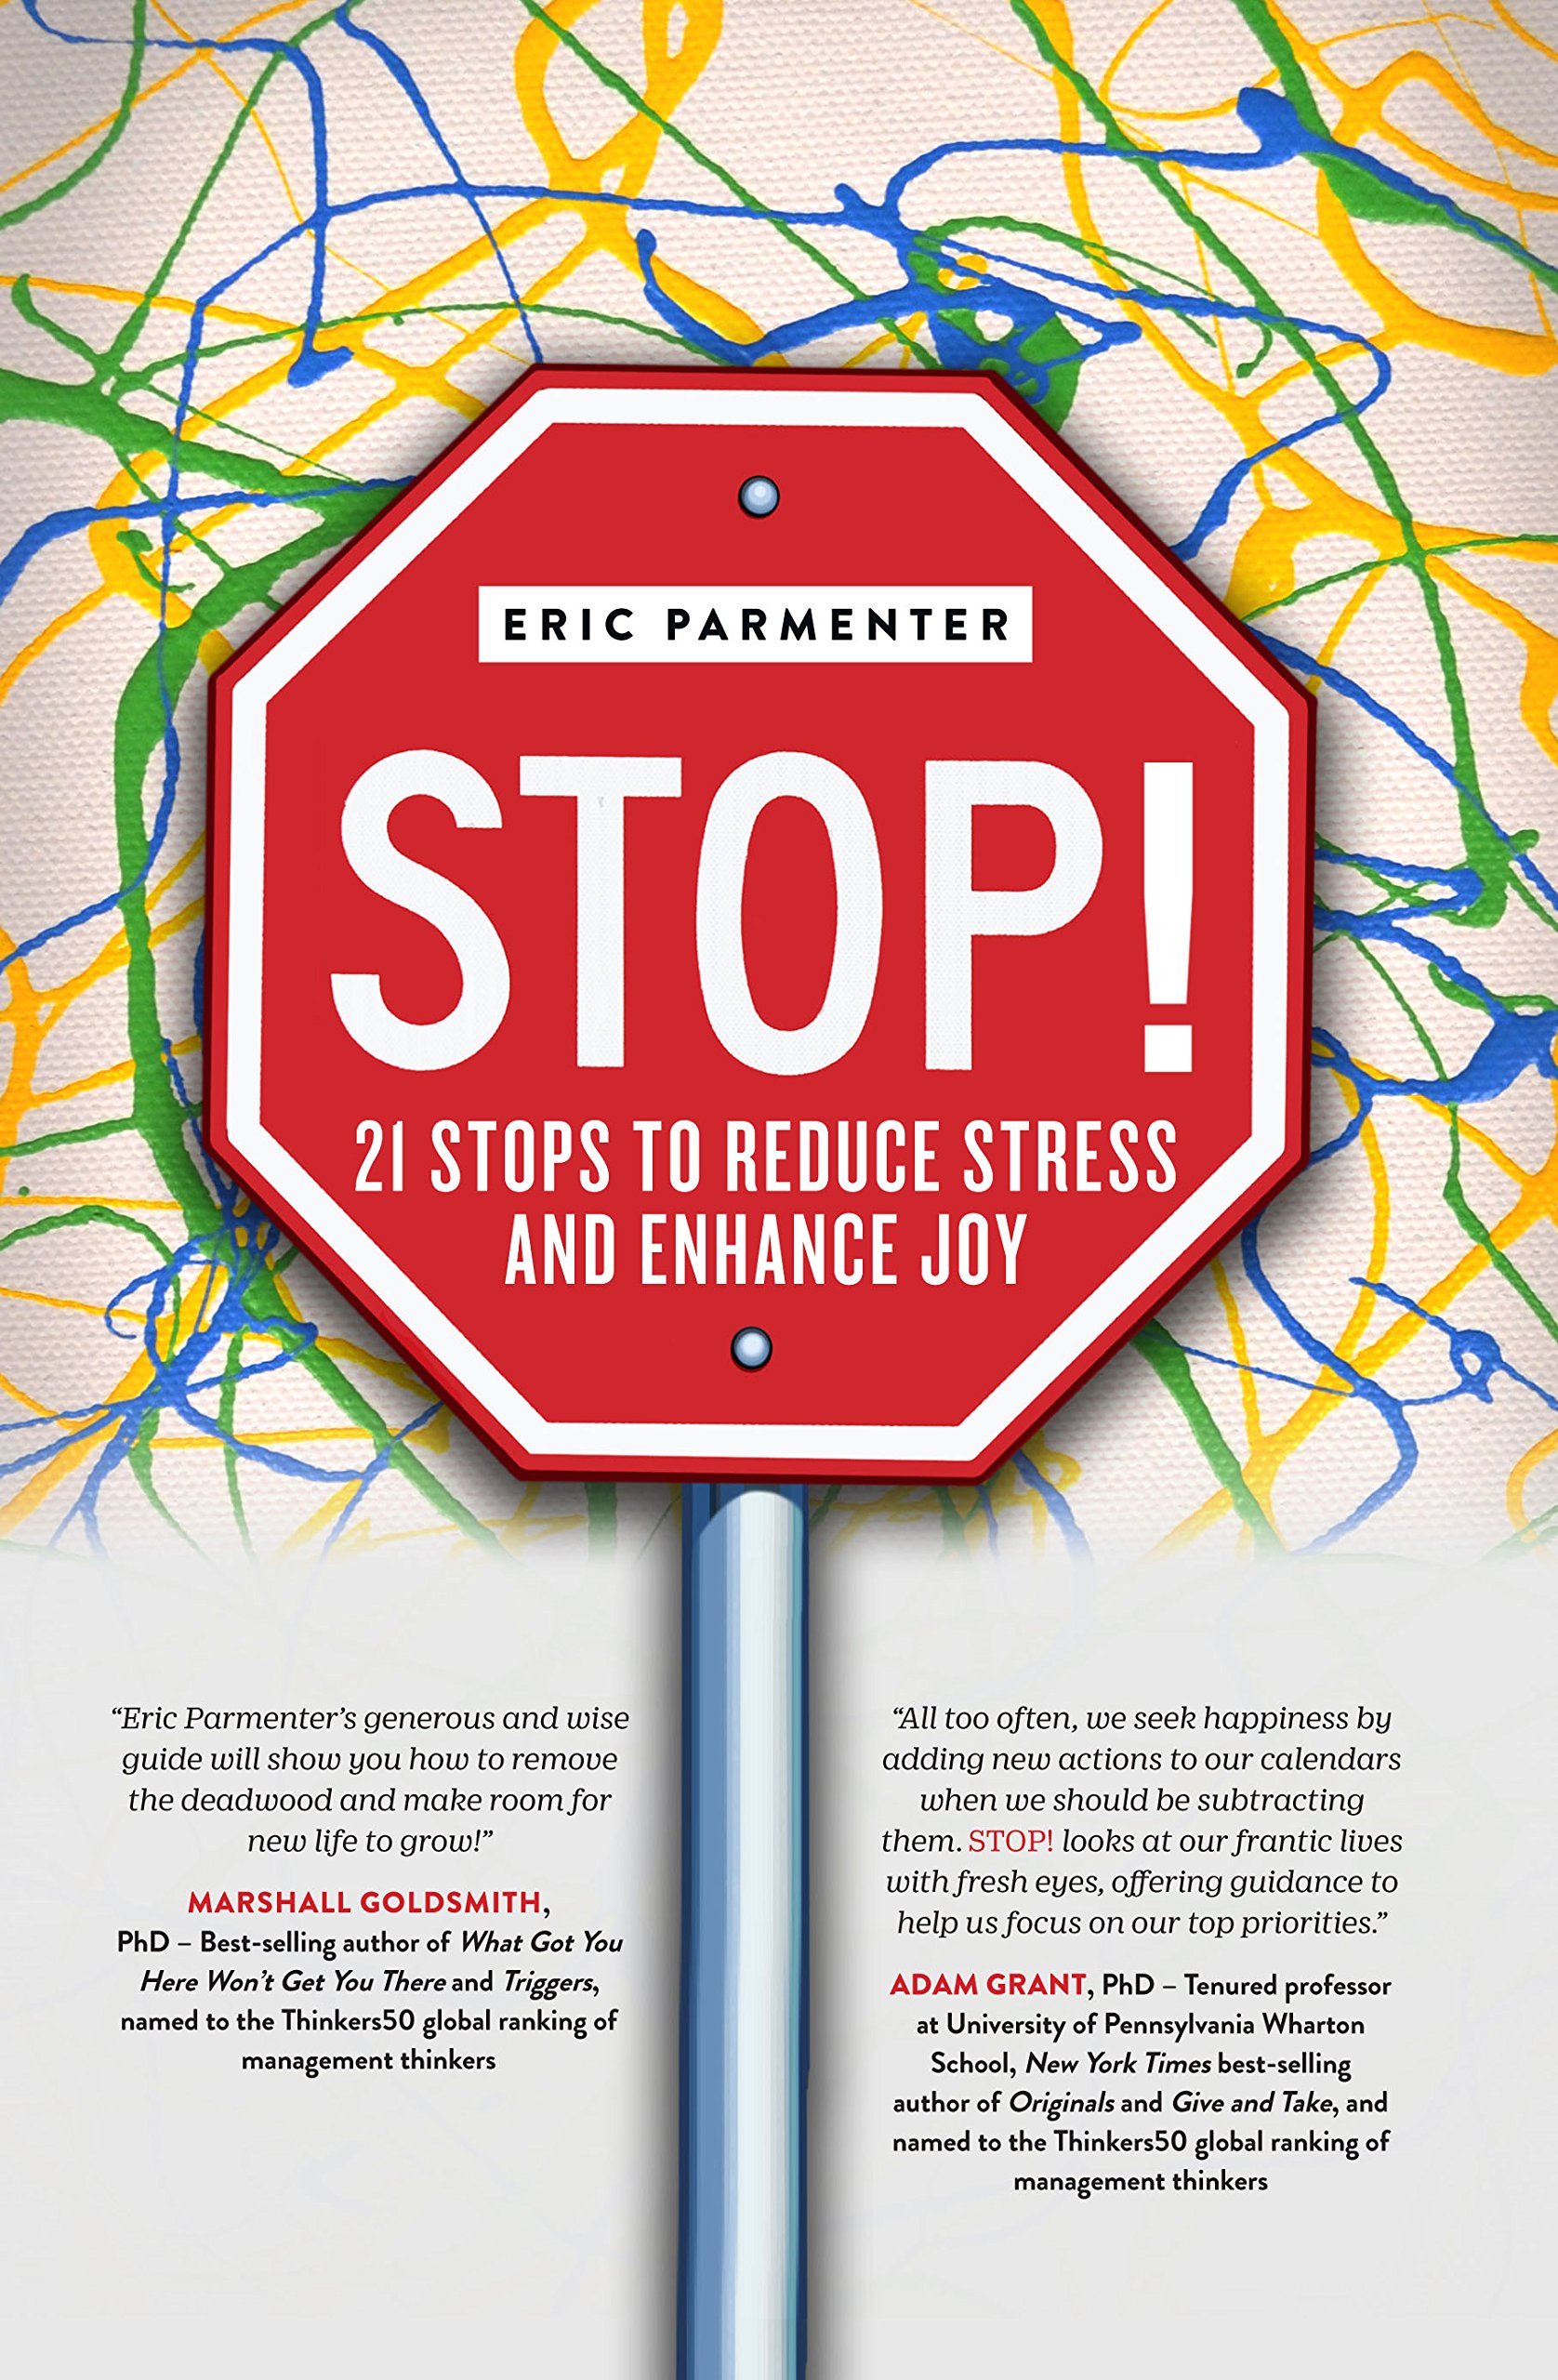 FREE: STOP!: 21 Stops to Reduce Stress and Enhance Joy by Eric Parmenter